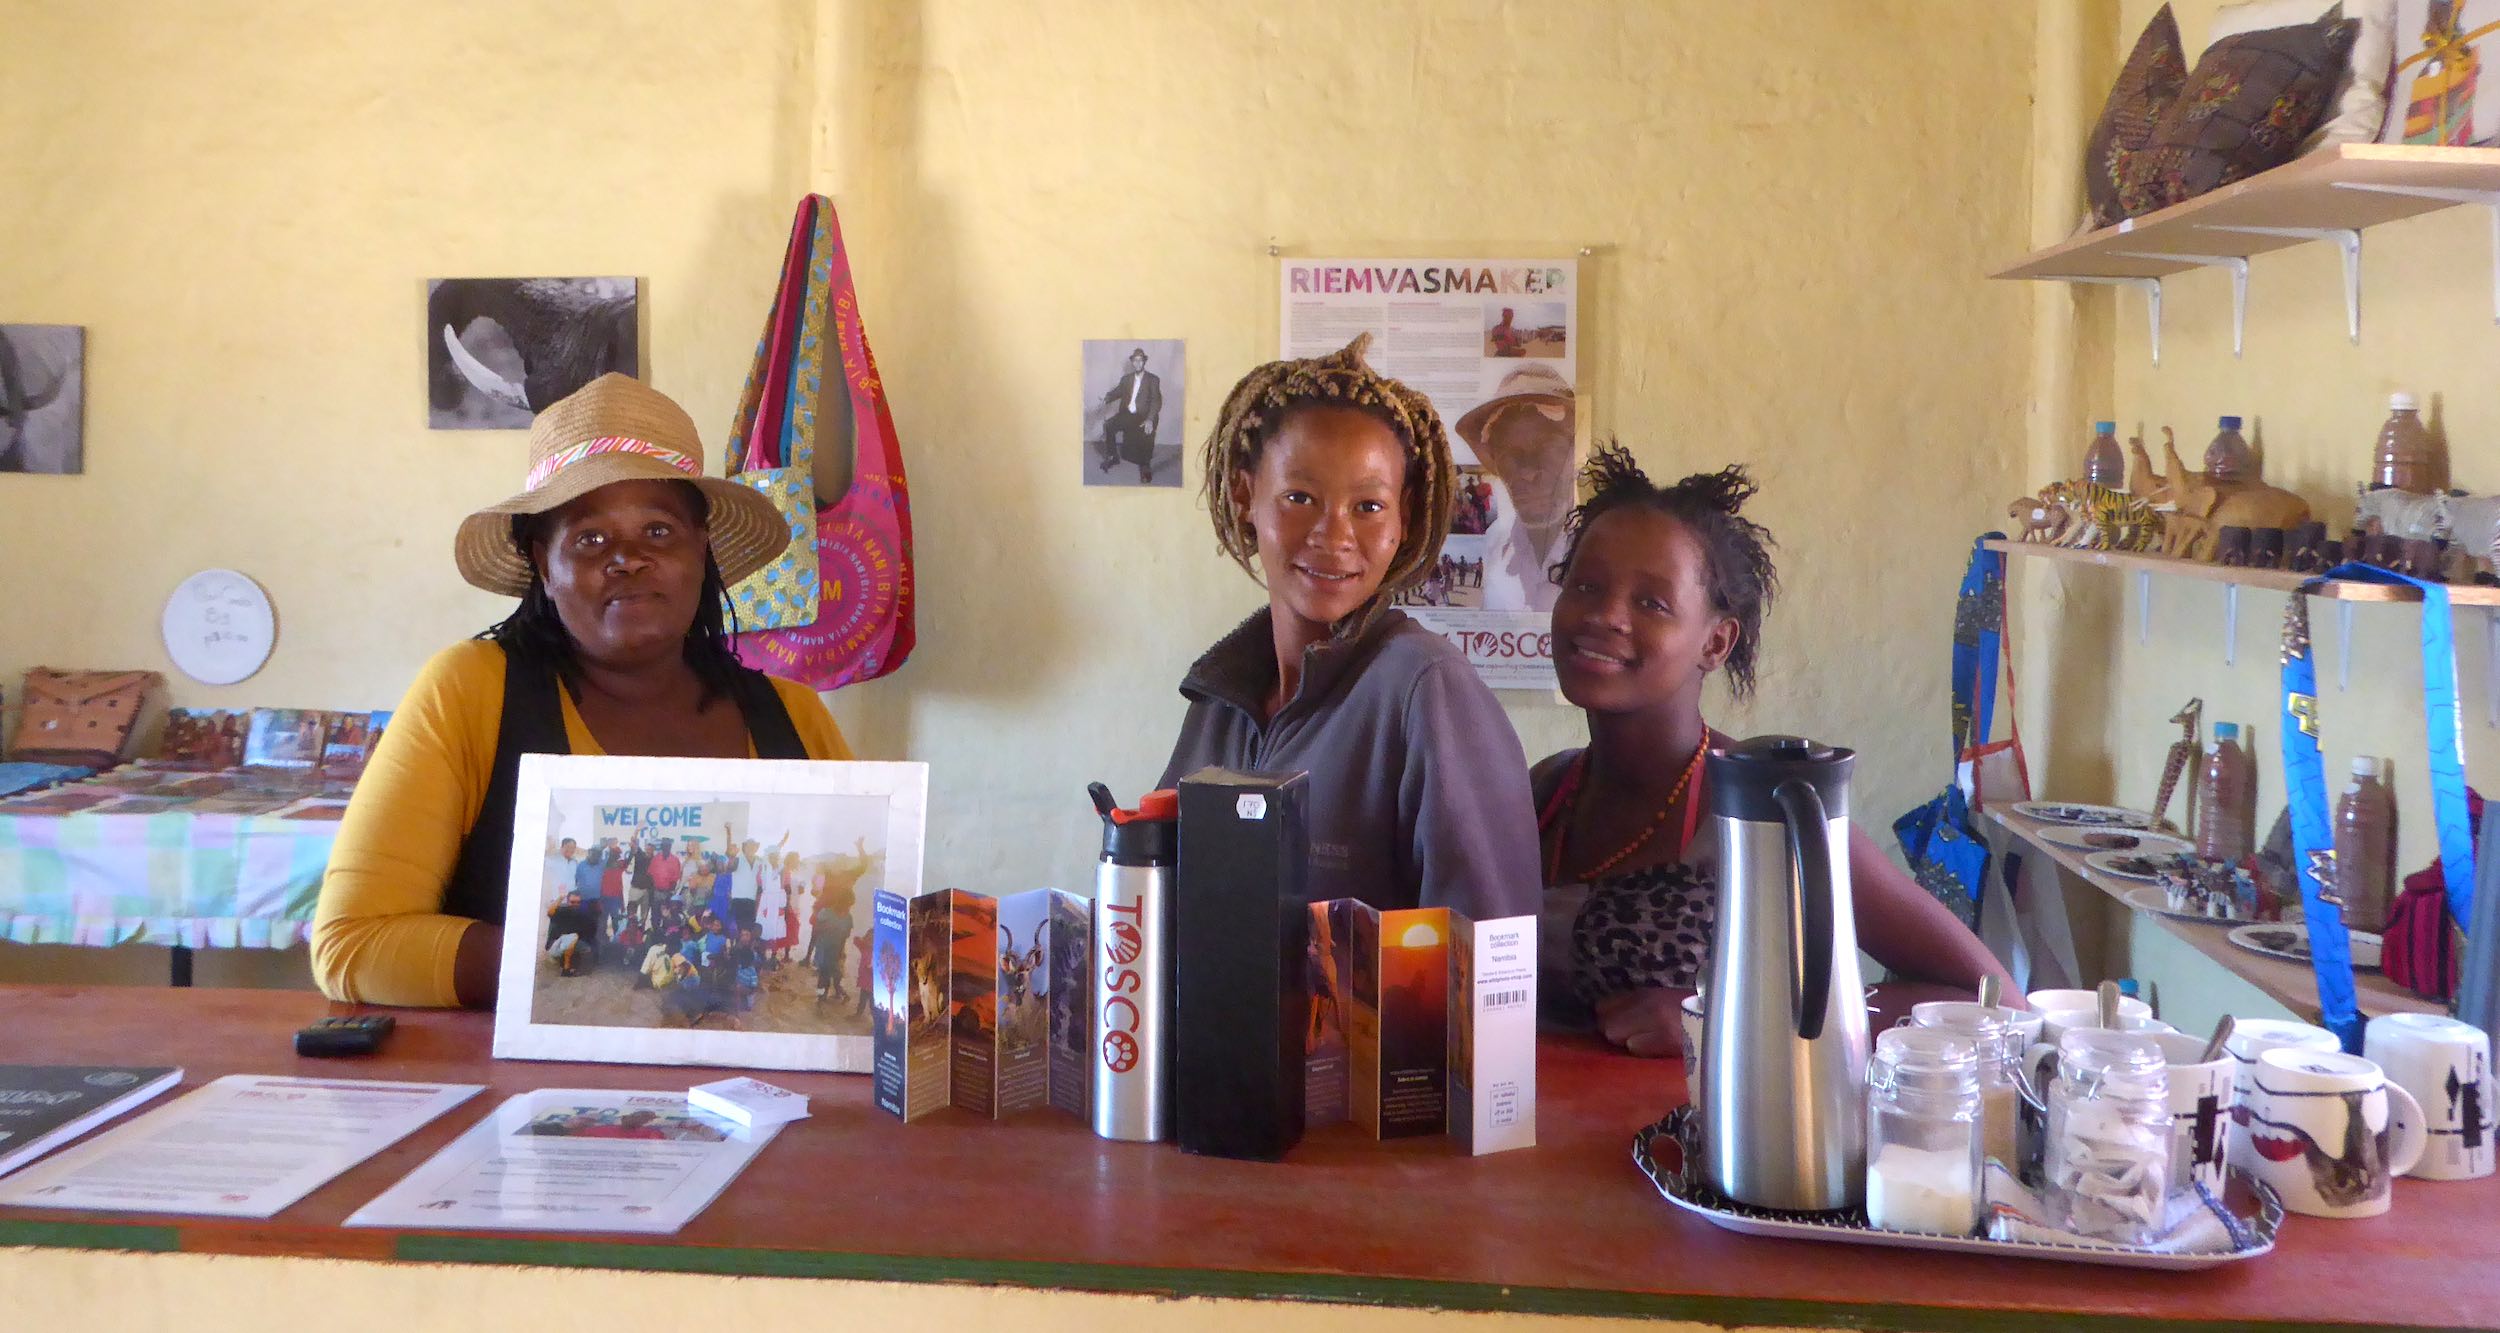 Three local women pose behind the counter of their information and craft centre.